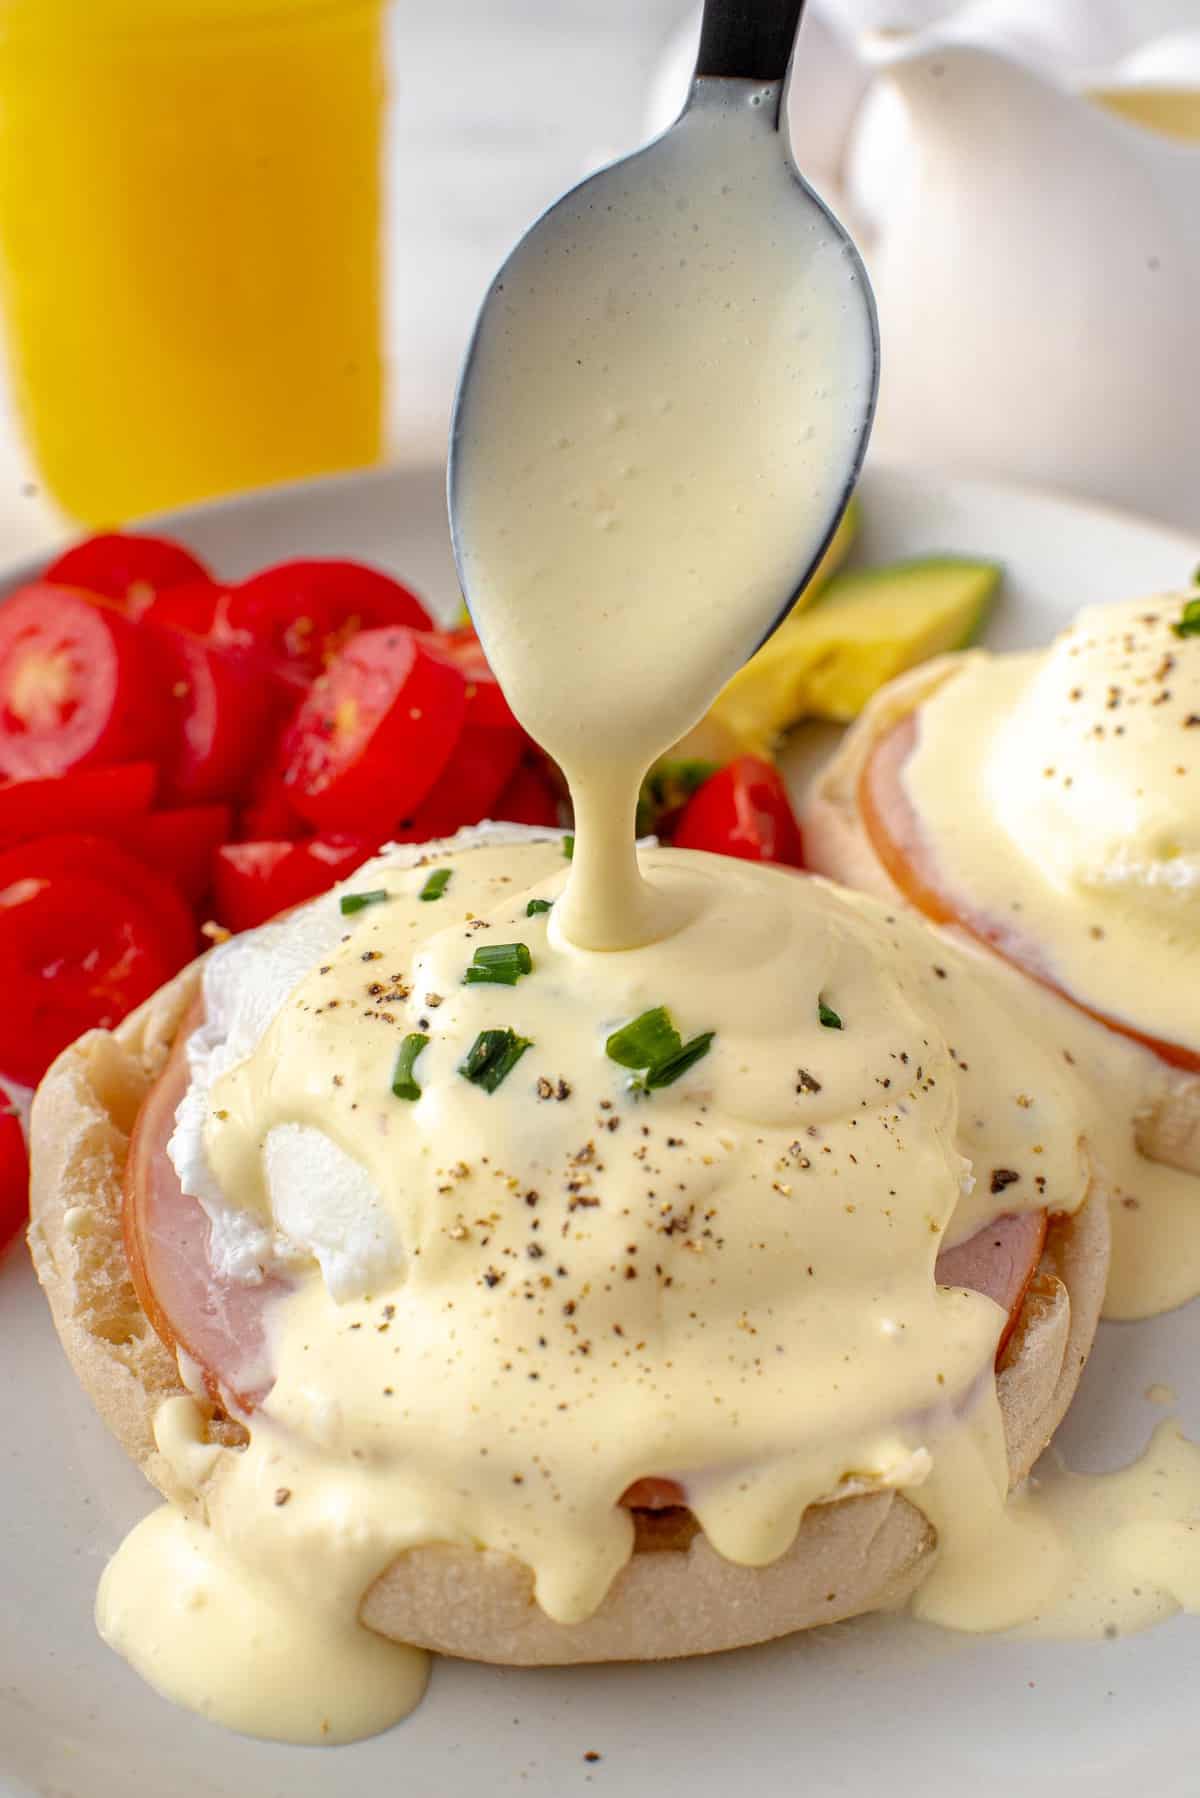 Hollandaise sauce being poured onto eggs, canadian bacon, english muffin.